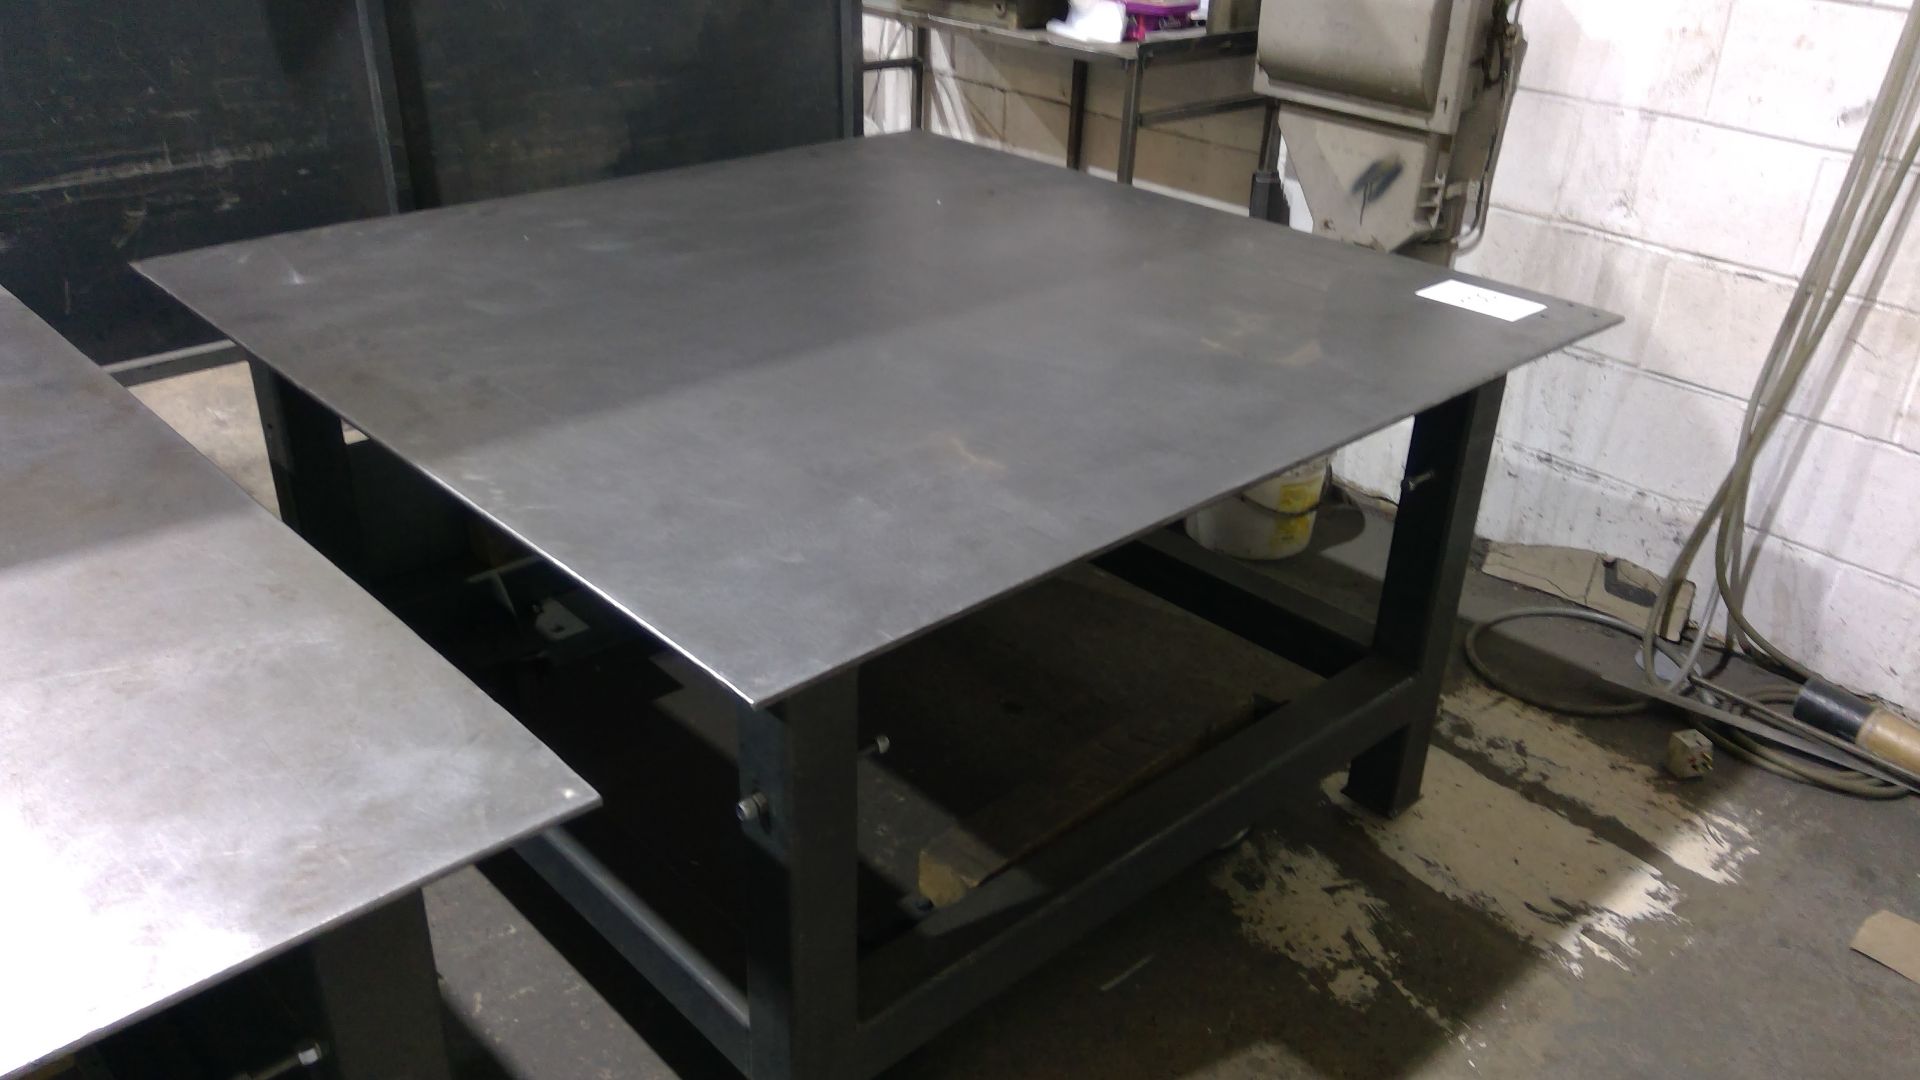 Mobile steel workbench approx 1.5m x 1.5m